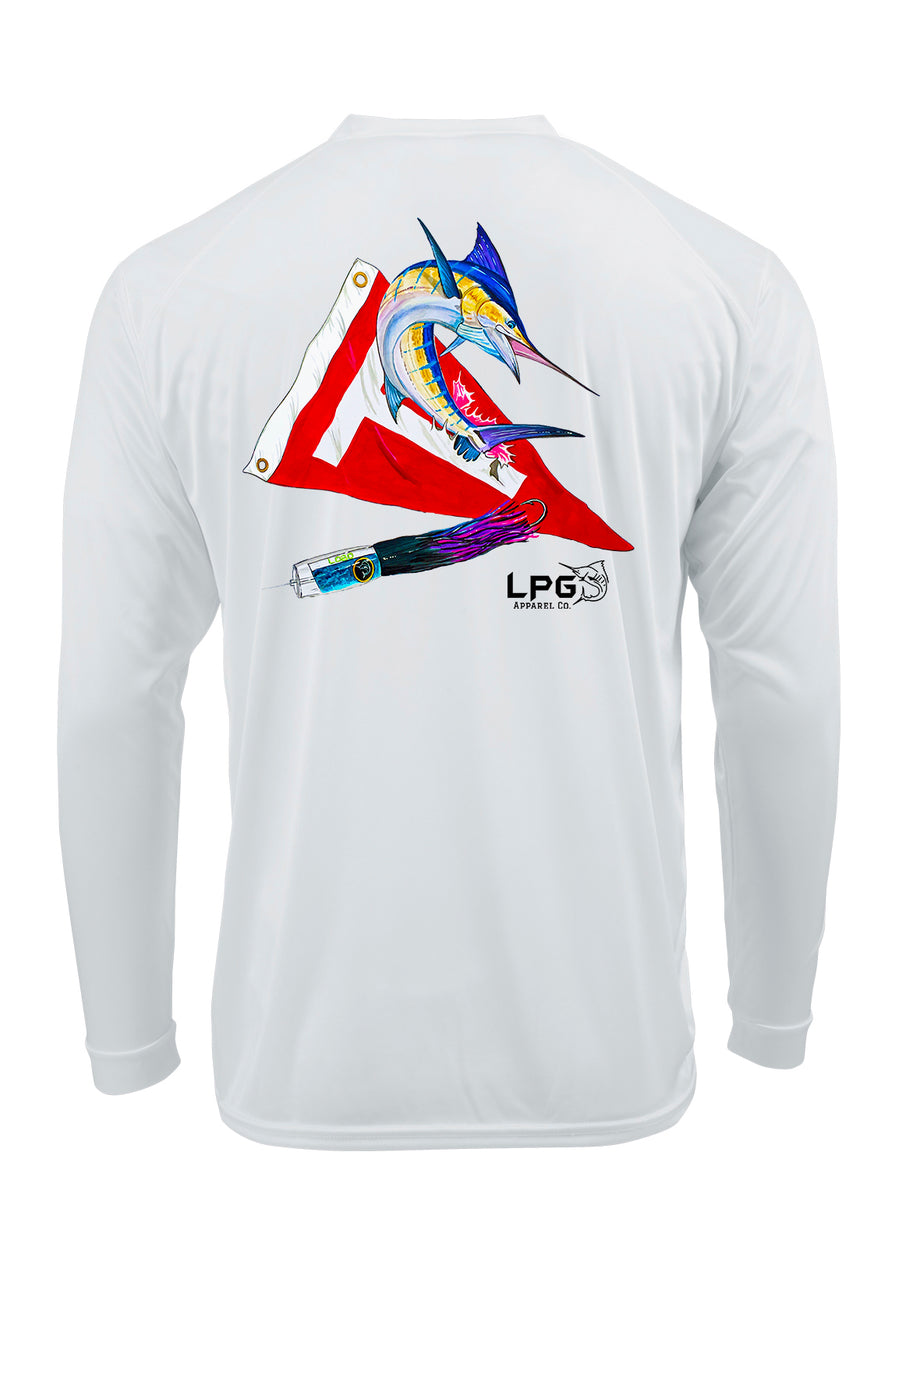 Bass Fishing Tournament UV Protection Shirts for Adult and Kid